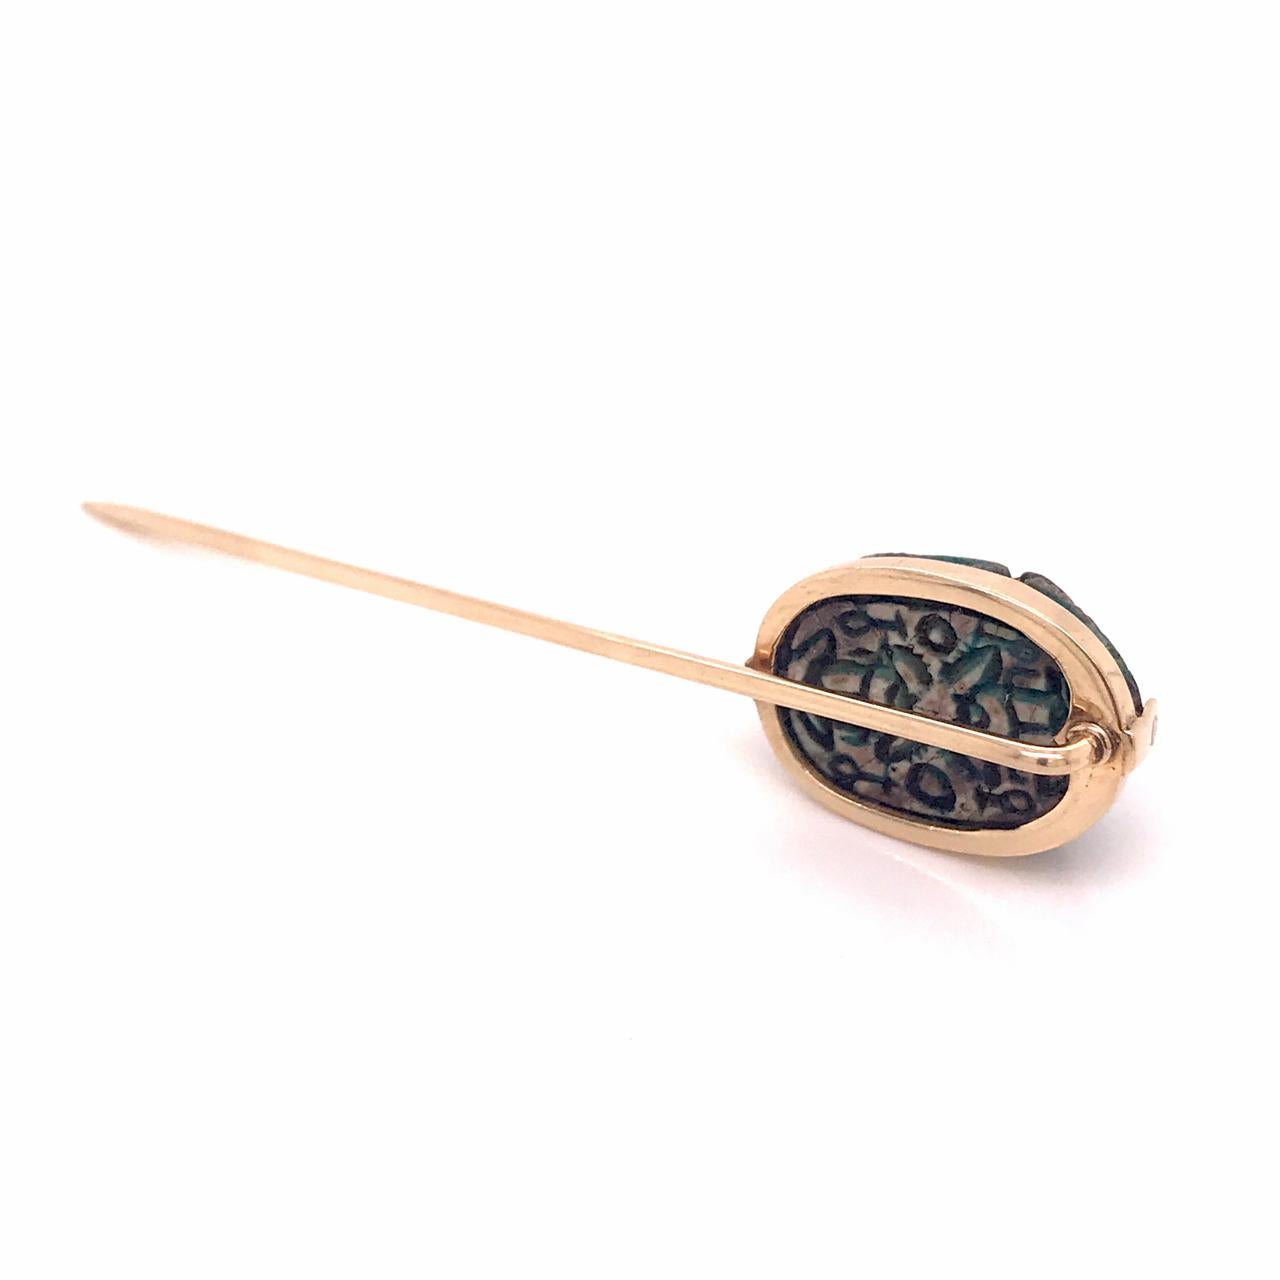 Antique Egyptian Revival Faience Scarab & 14 Karat Gold Stick Pin For Sale 4